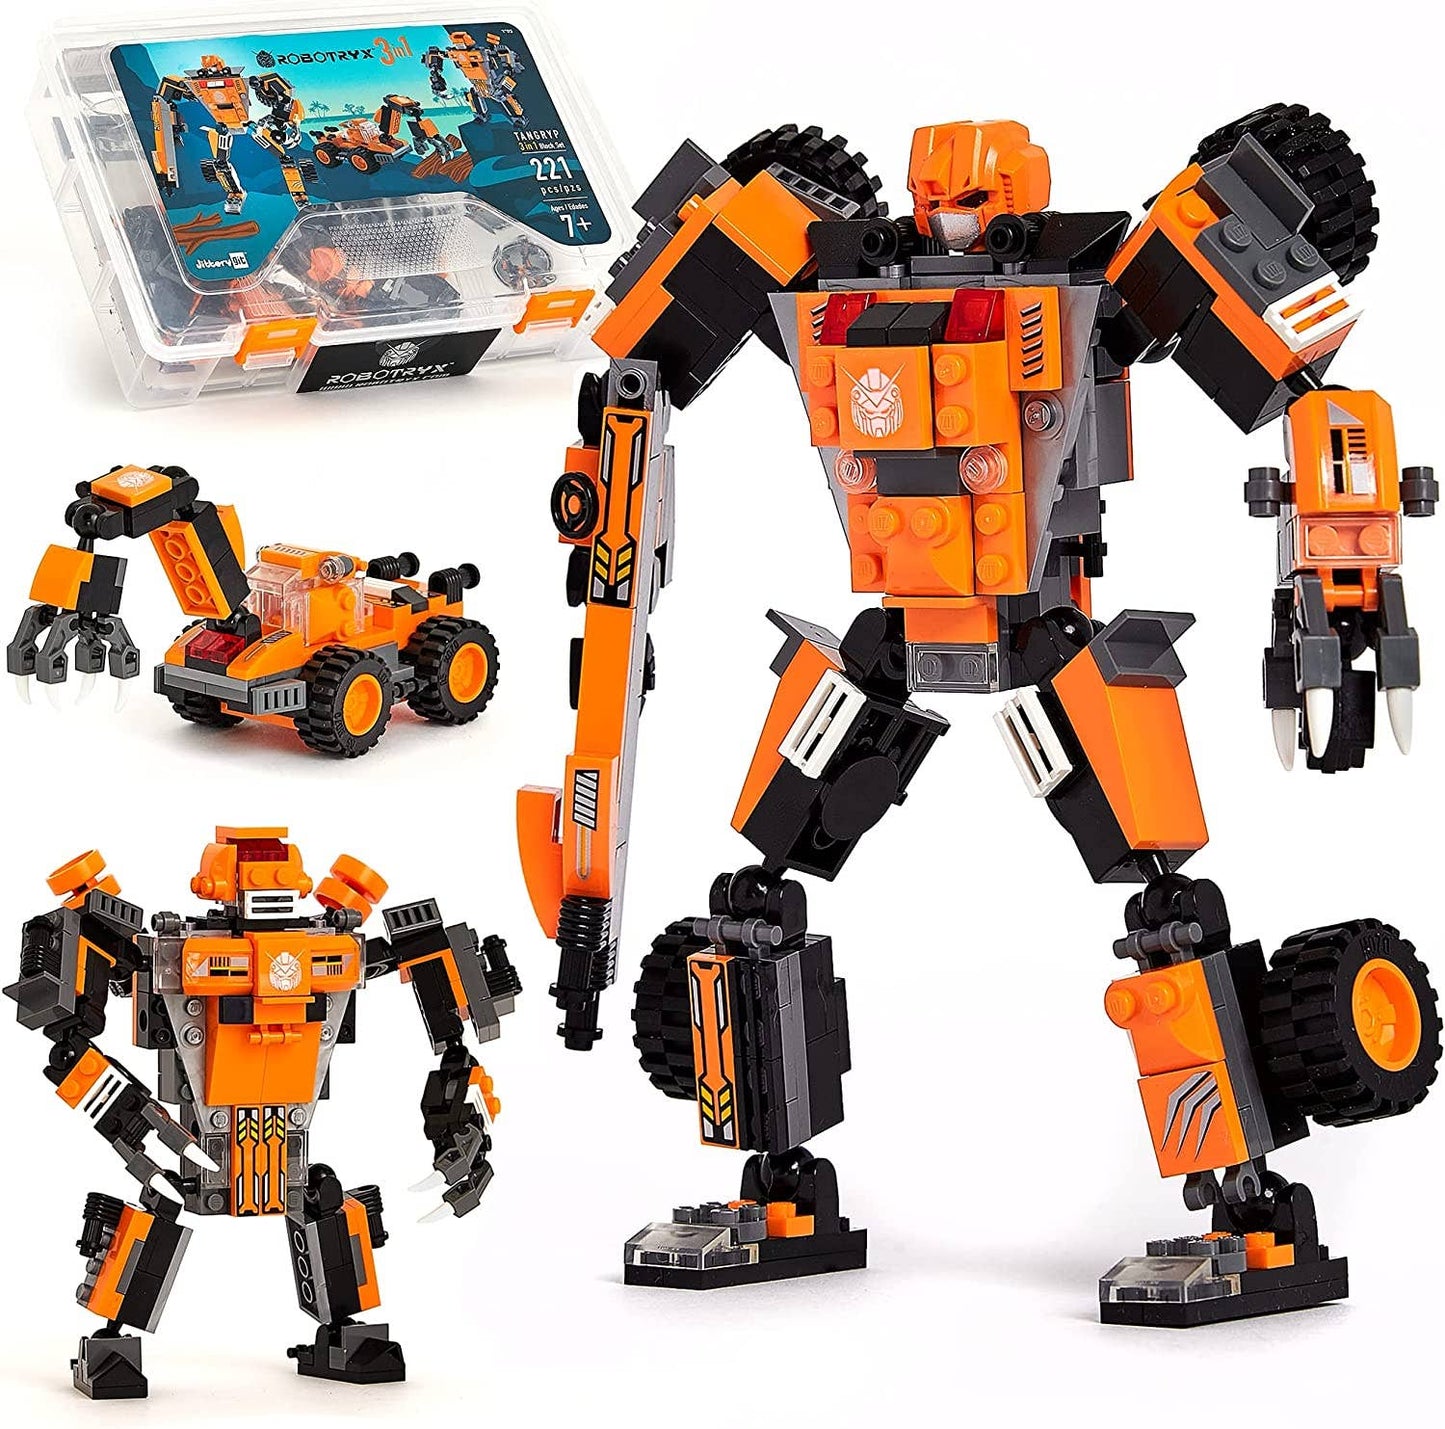 Kids Three-in-One Toy Building Set (221 Pc) Robotryx Tangryp